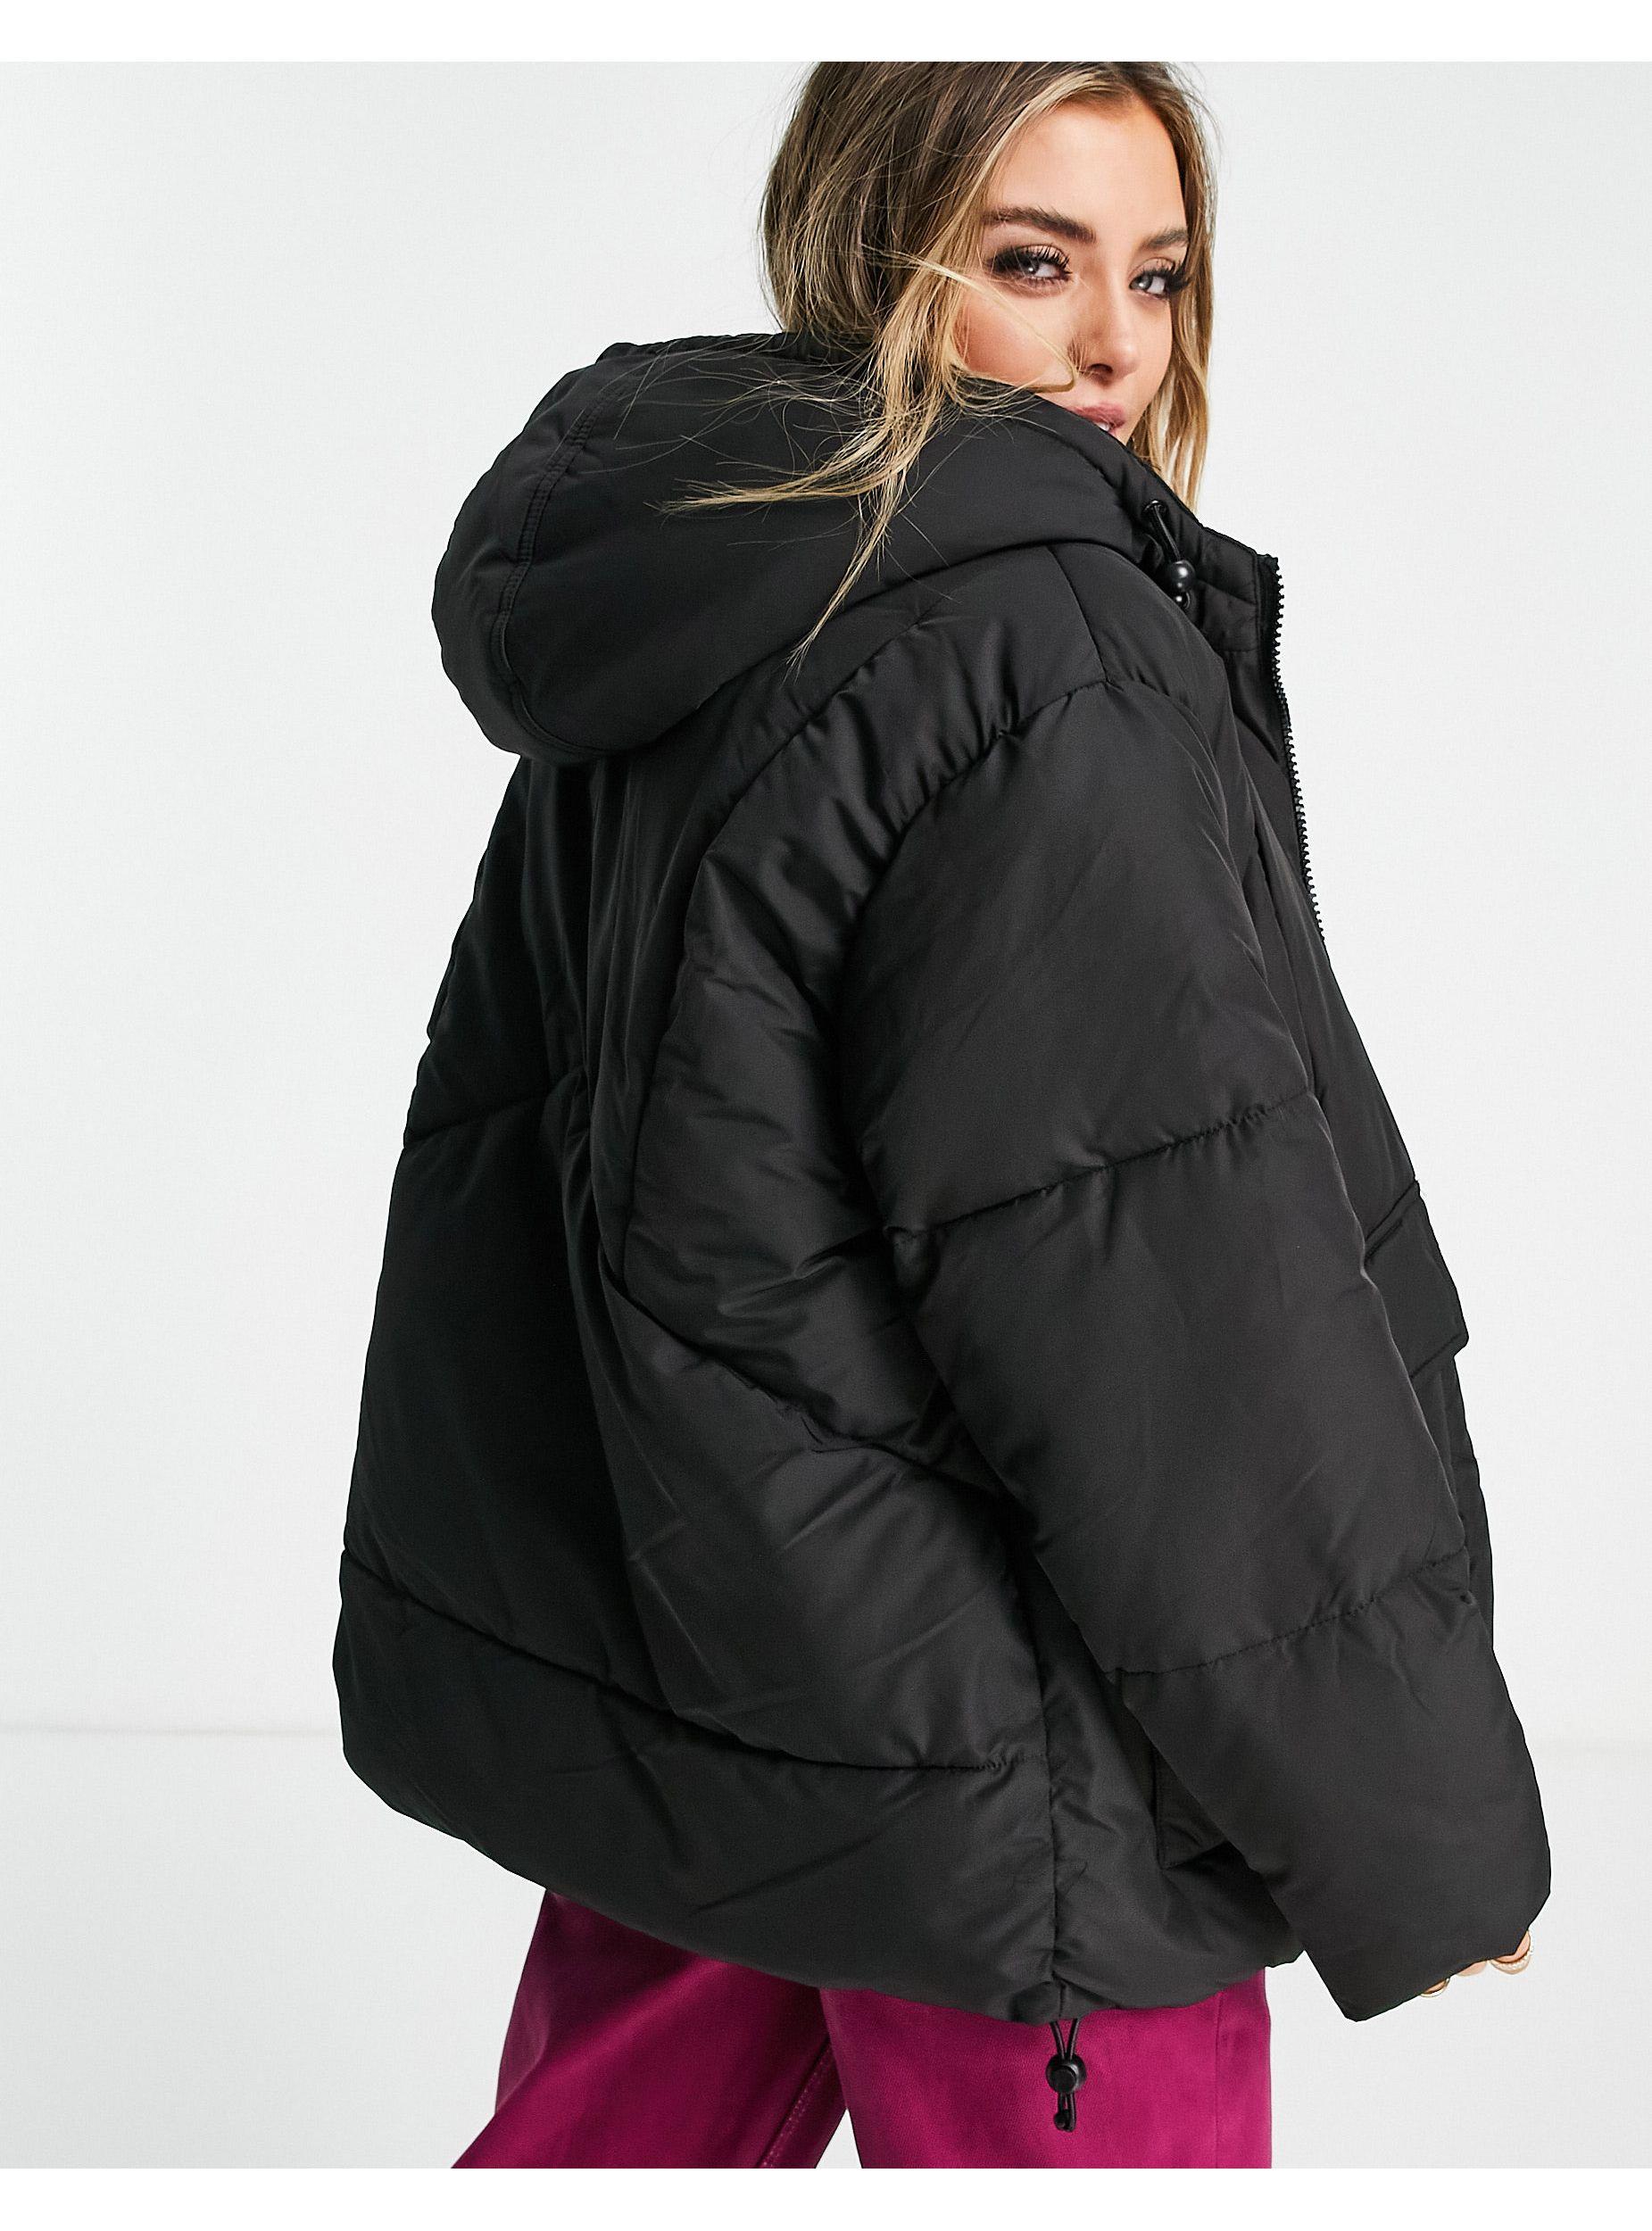 Seminarie Wijden Slank TOPSHOP Mid-length Puffer Jacket With Borg-lined Hood in Black | Lyst